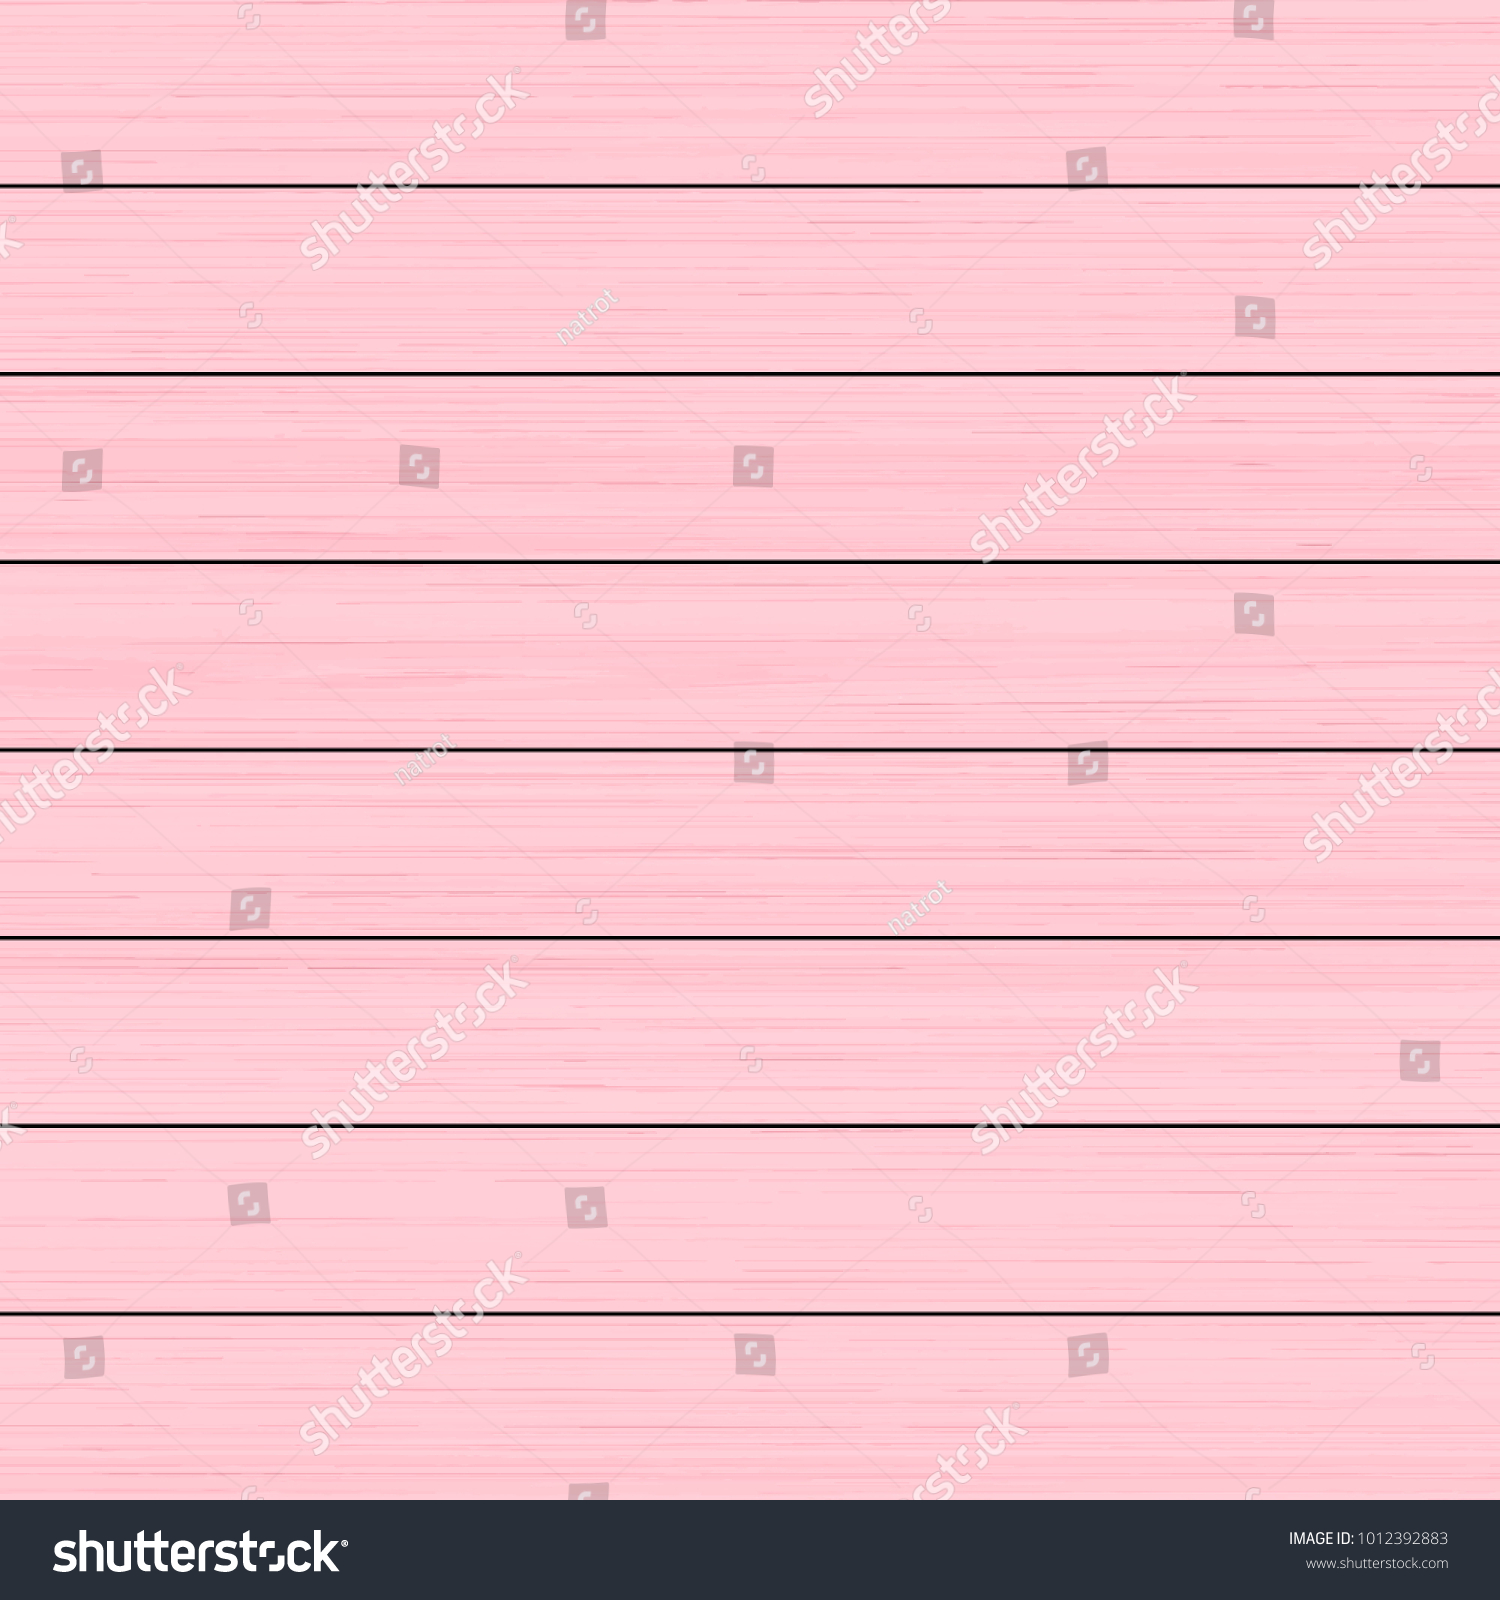 Pink Wood plank texture background - Vector #1012392883